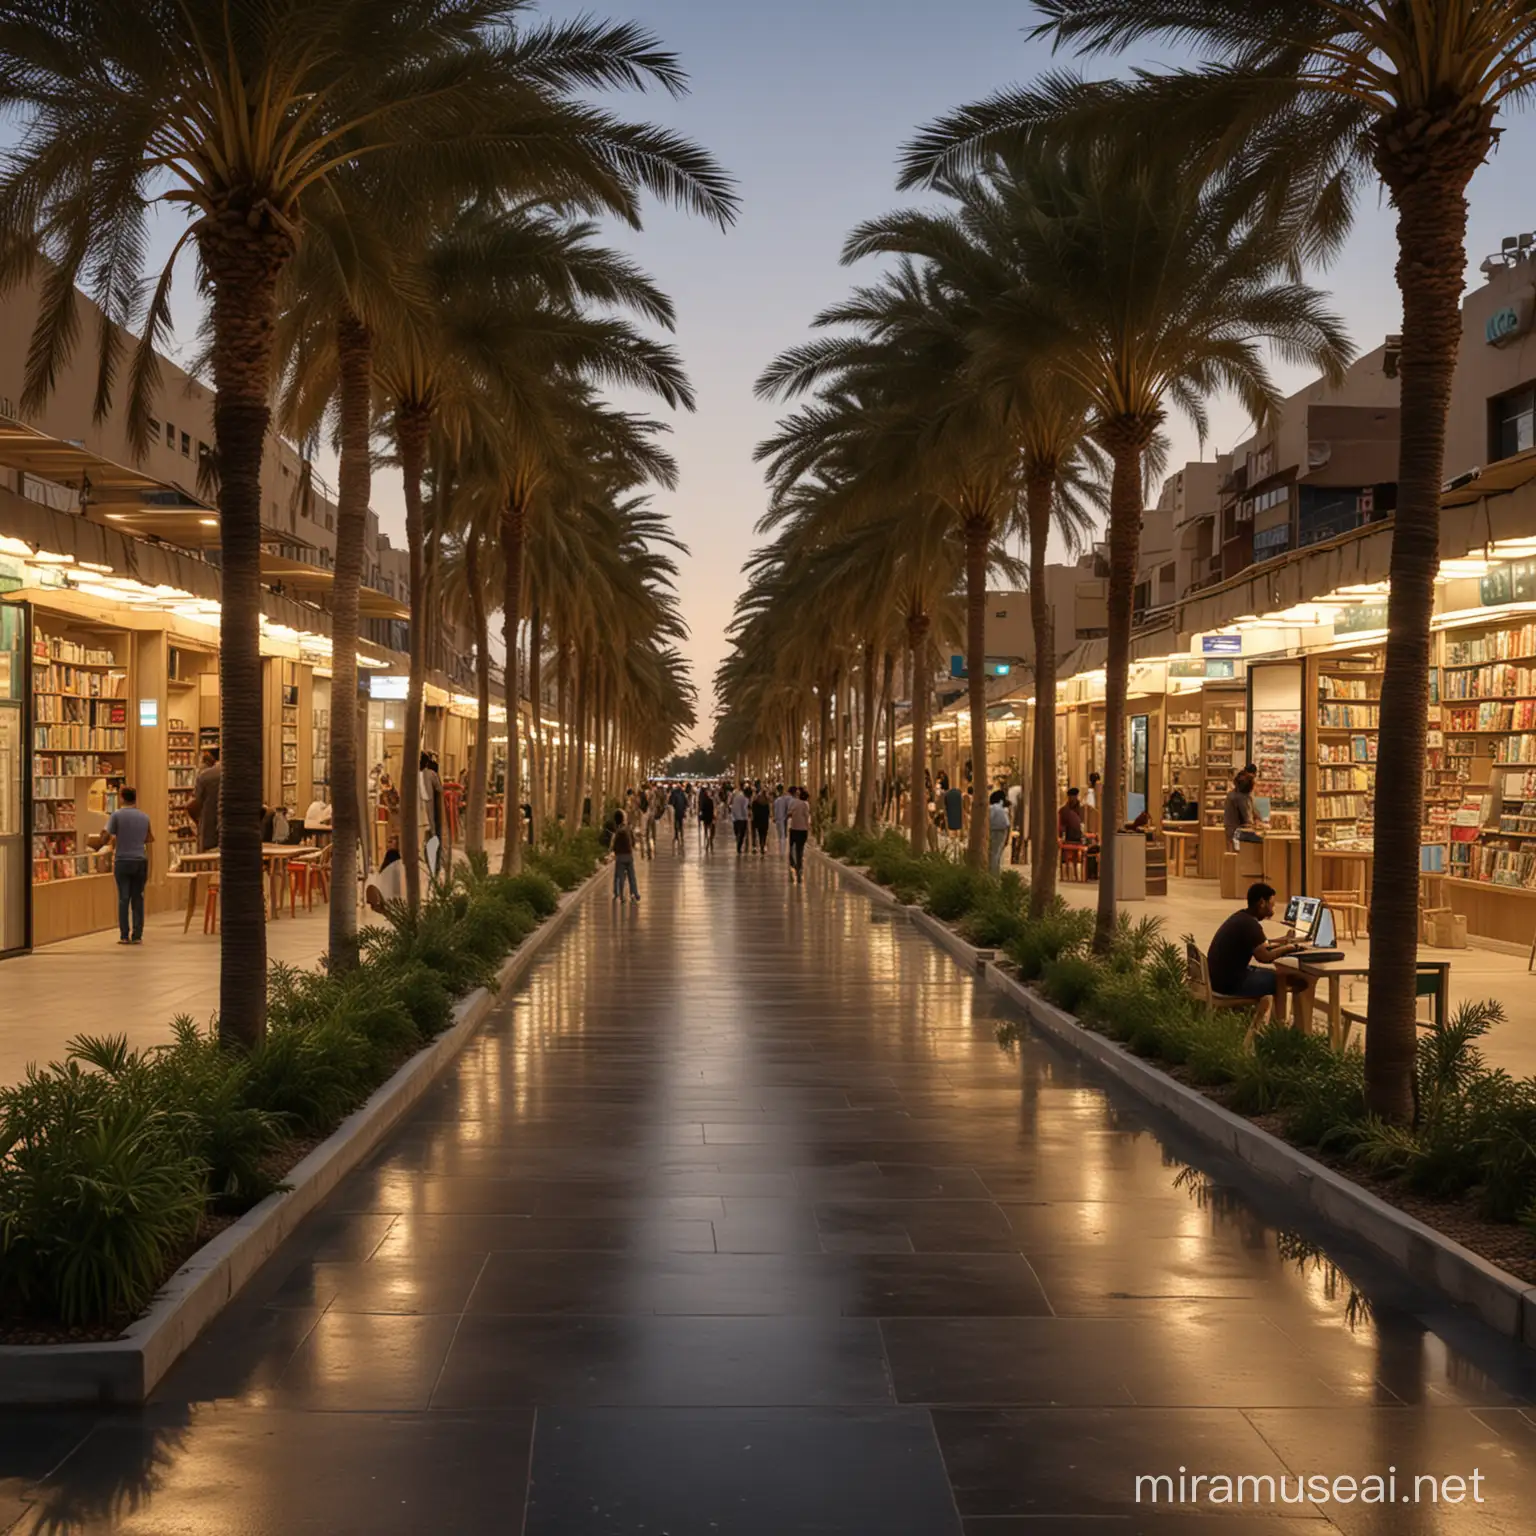 Imagine an architectural development of Al-Mutanabbi Street in Baghdad in a modern, modern way, while preserving bookstore kiosks and places for people to sit and rest, with small kiosks selling popular food, with palm trees and plants, and small water fountains for children to play, and it would be at sunset with night lighting.